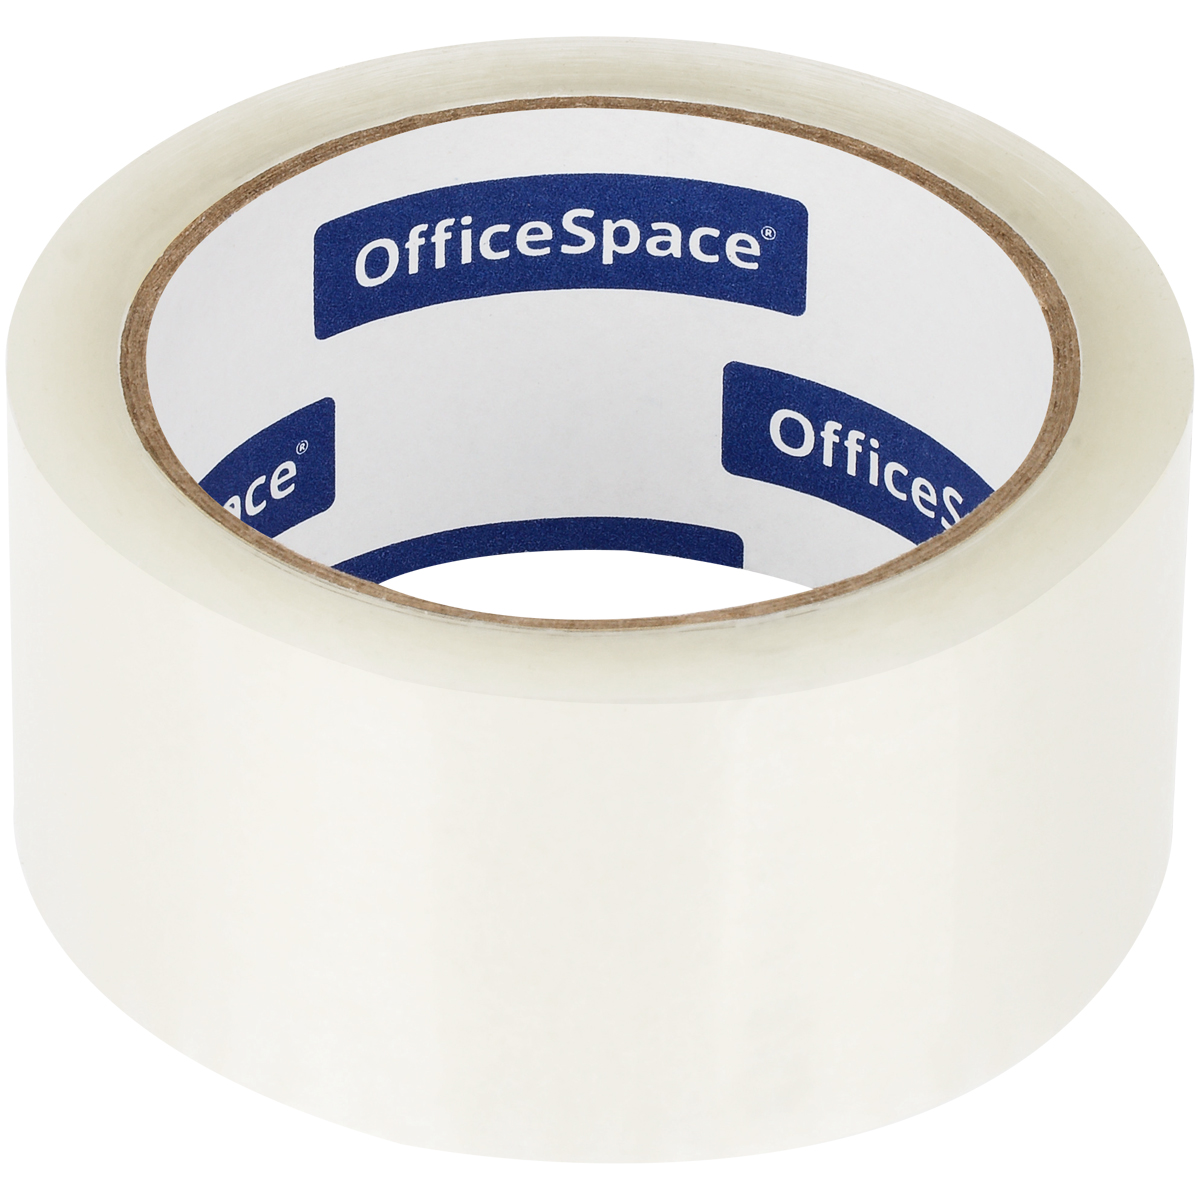    OfficeSpace, 48*66, 4 